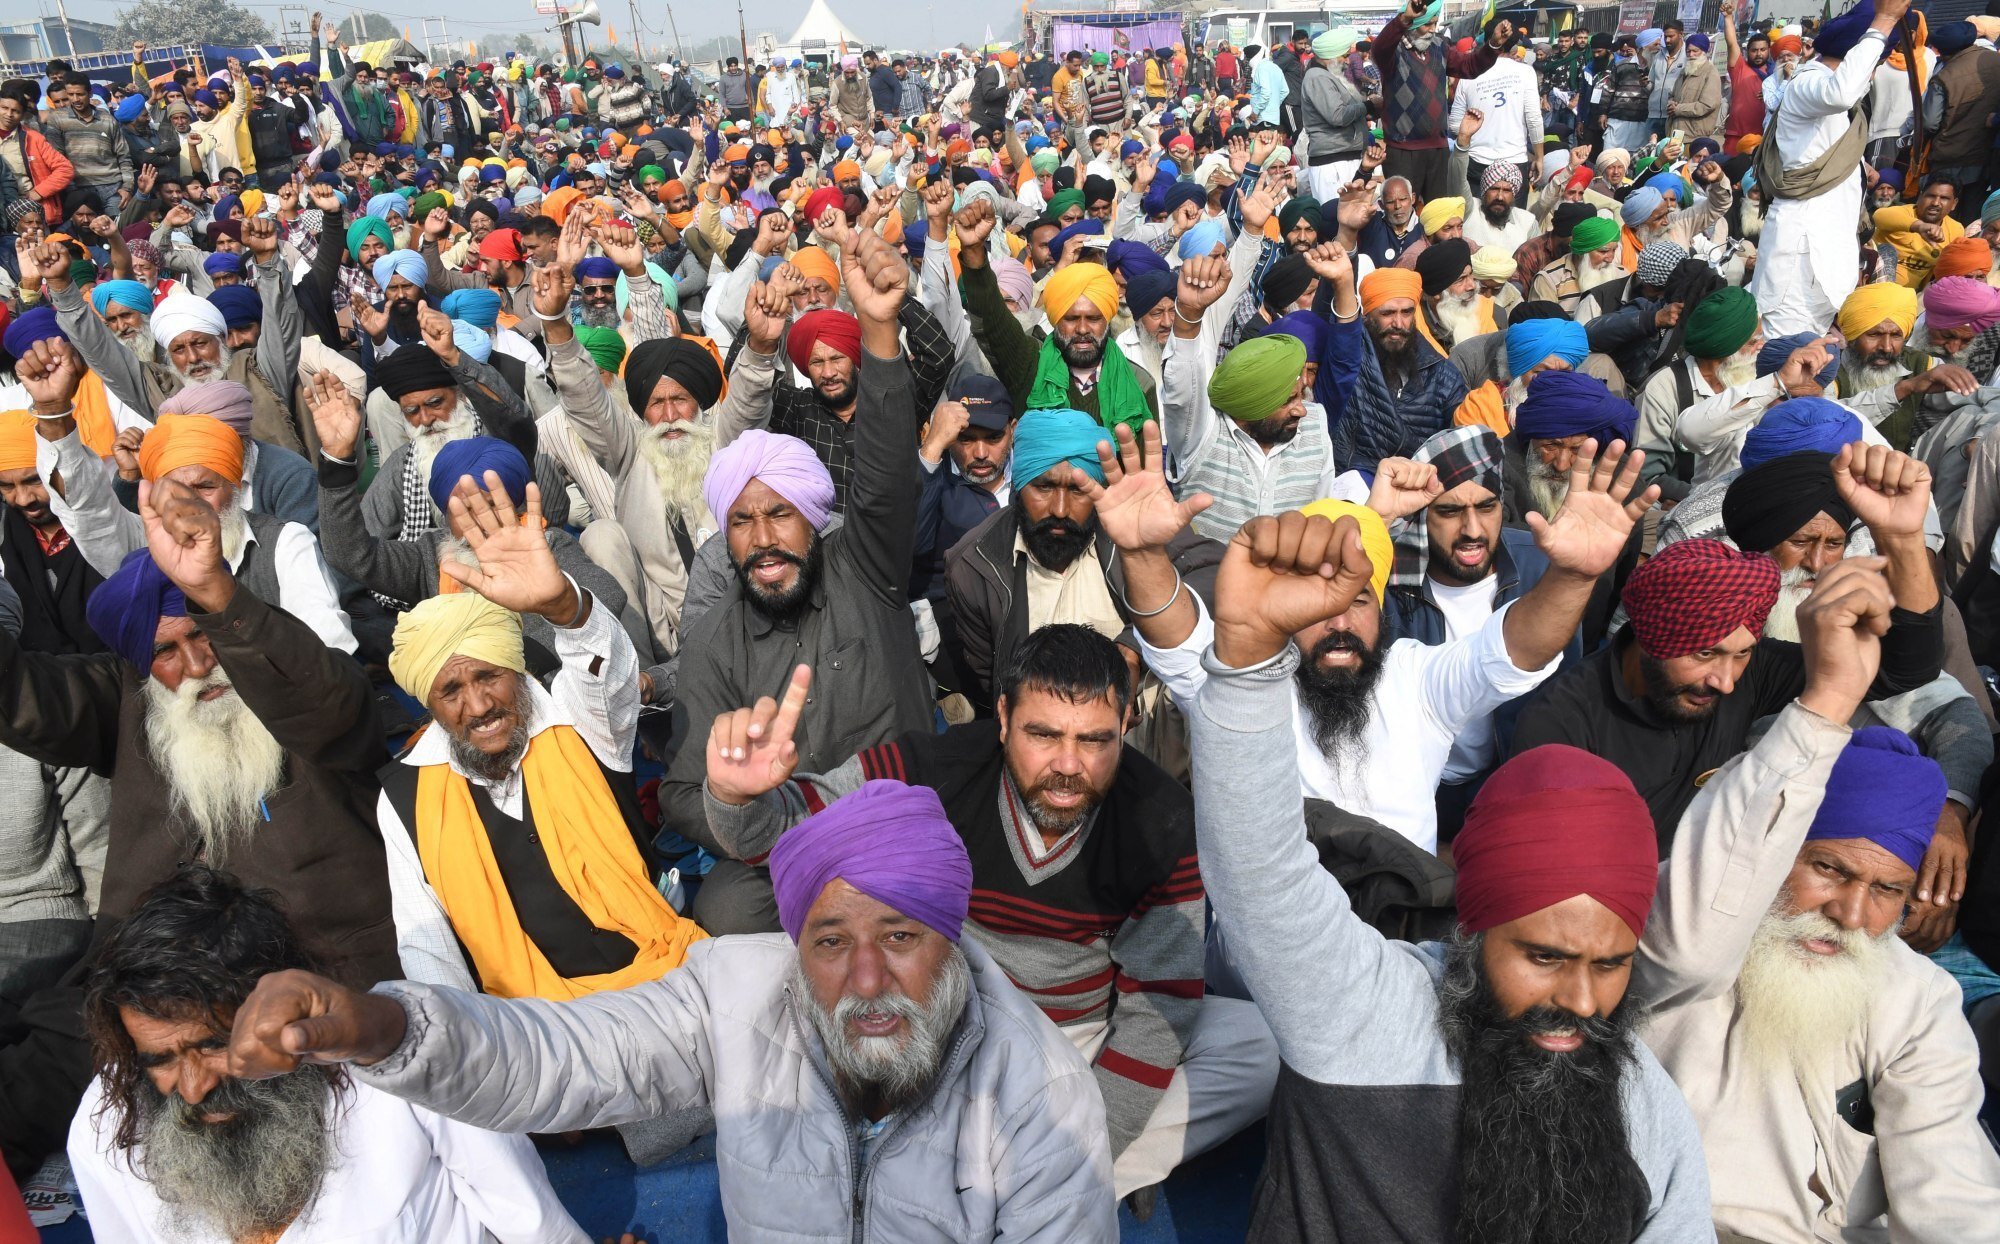 Thousands of Indian farmers gathered and tried to cross sealed New Delhi border points to hold protests against the government’s new farm laws December 2020. Photo: EPA-EFE/STR